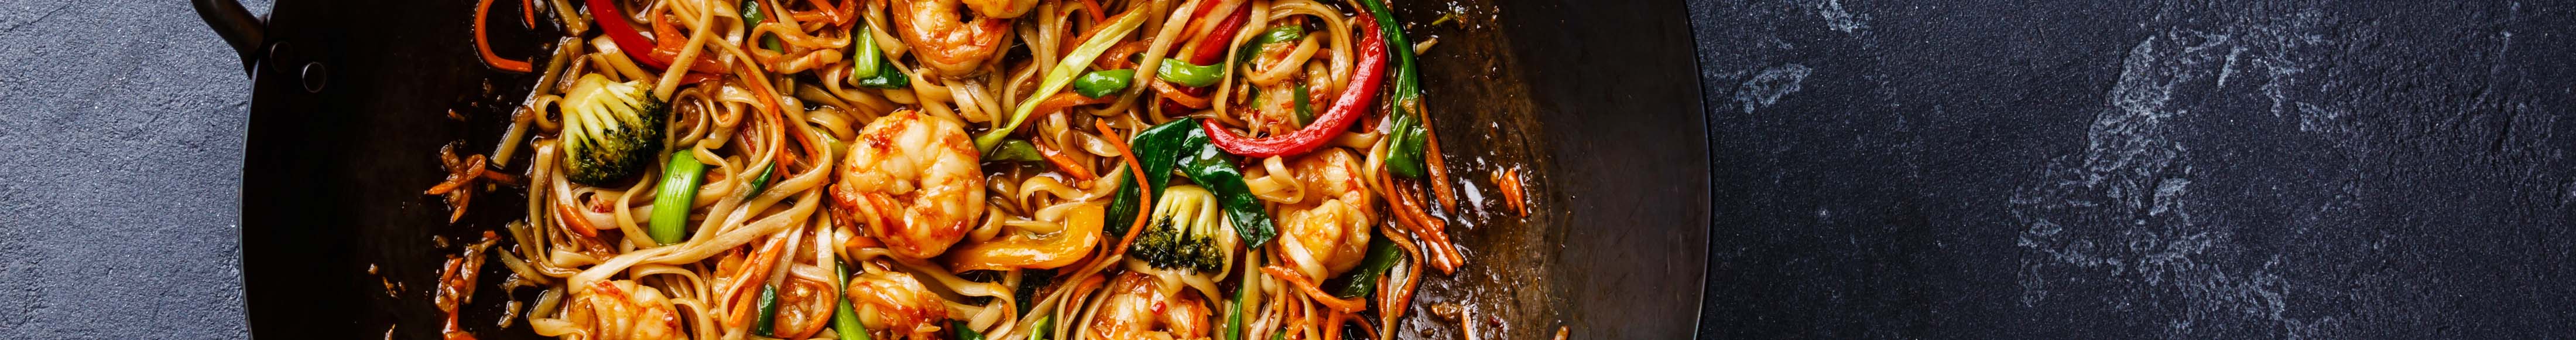 Build your own wok